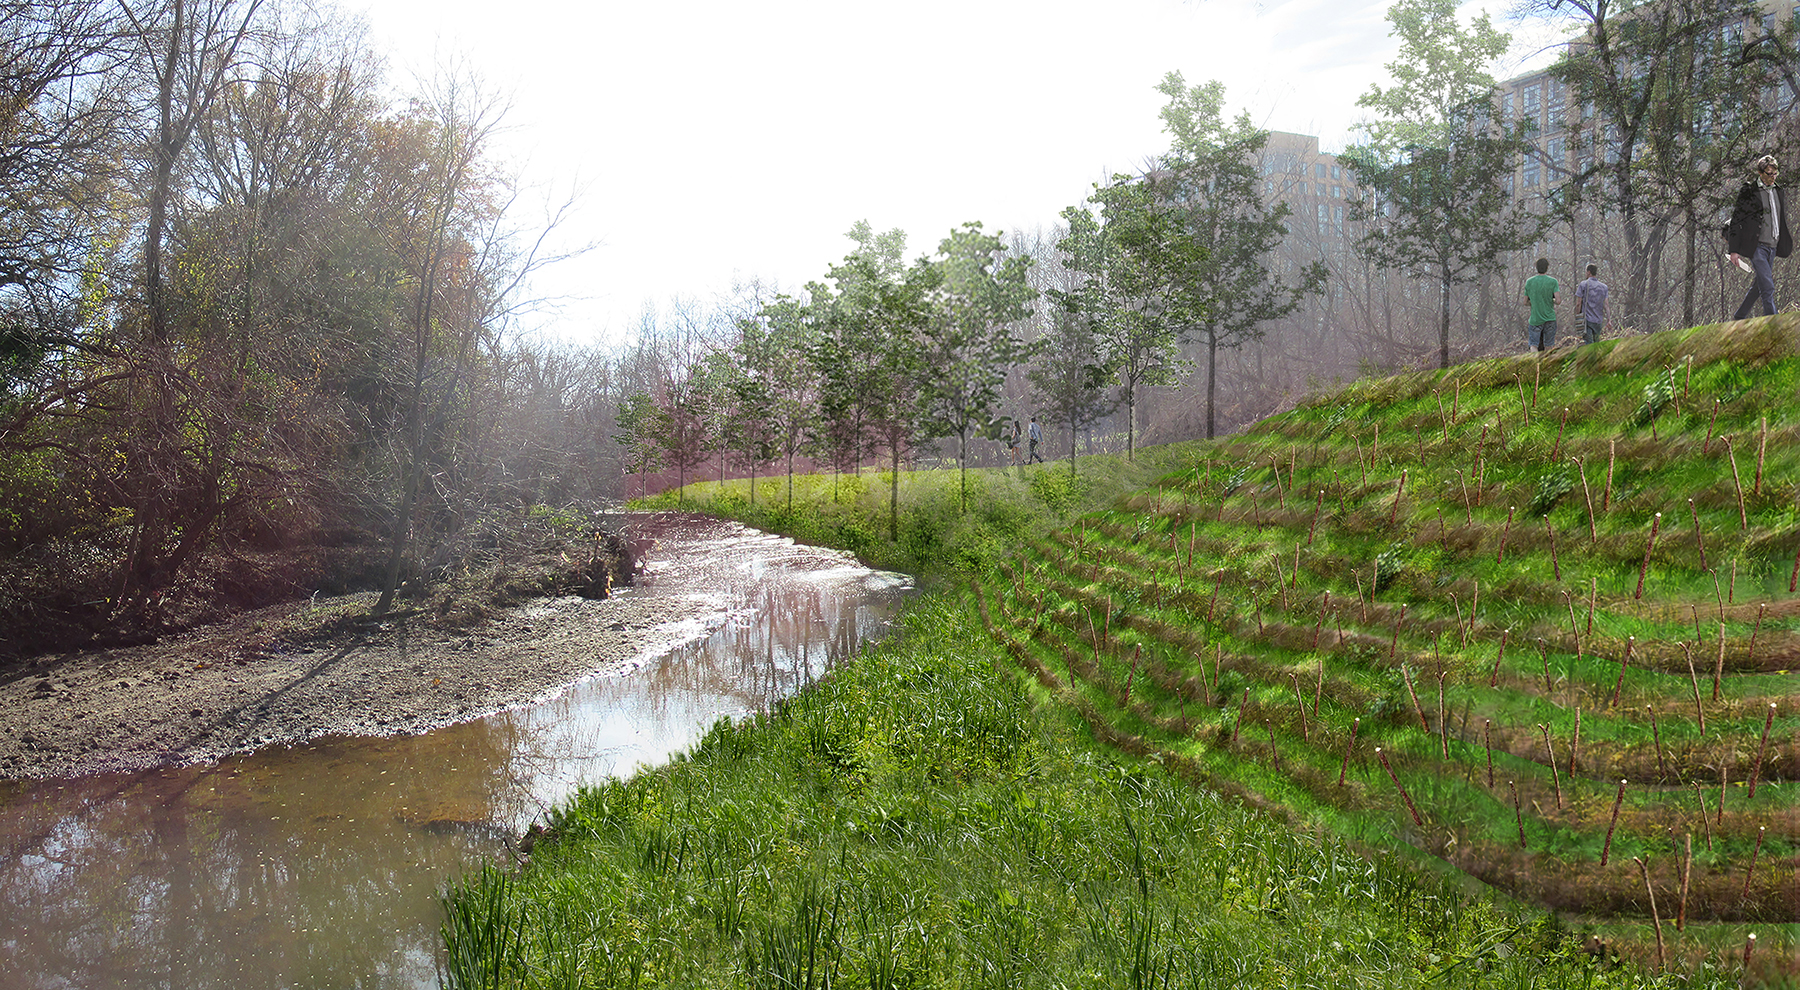 Two outfalls empty into the Hooffs Run stream. An open cut pipeline will shunt both overflow sites to the treatment plant, while native plants and habitat will complete a riparian buffer that further protects the stream water quality. (Rendering courtesy of AlexRenew) 